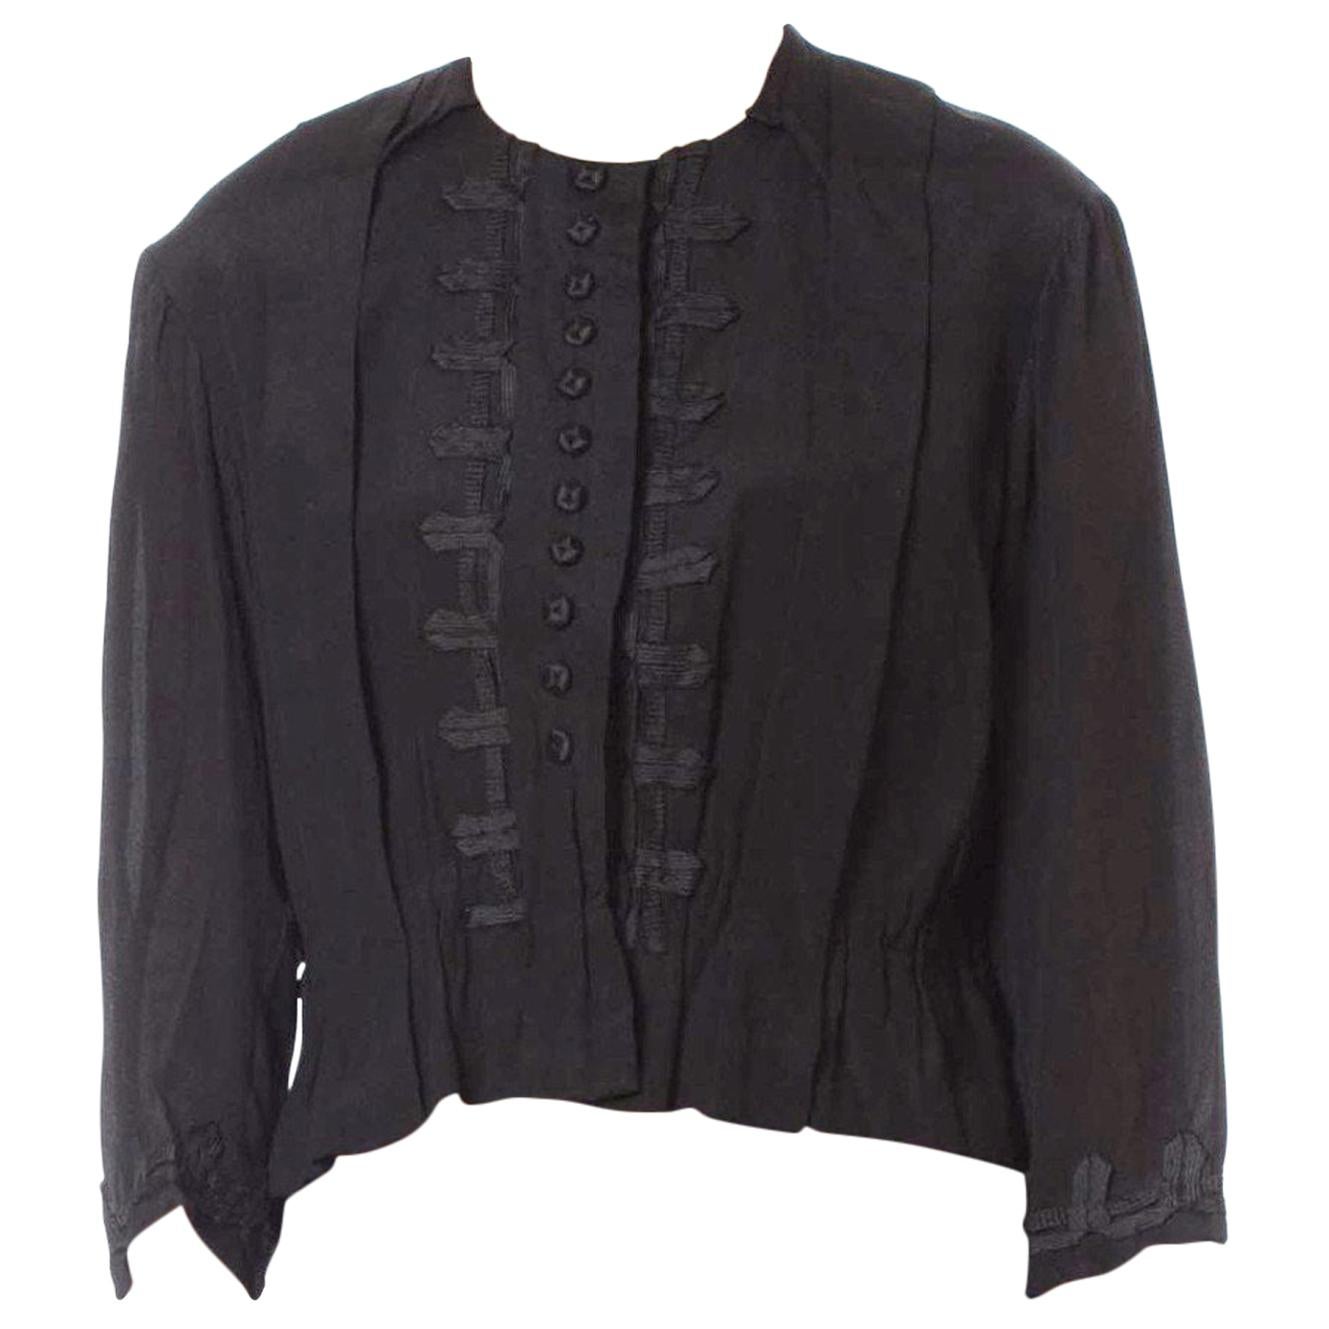 Edwardian Black Silk Crepe De Chine Blouse With Military Passementerie & Lined 